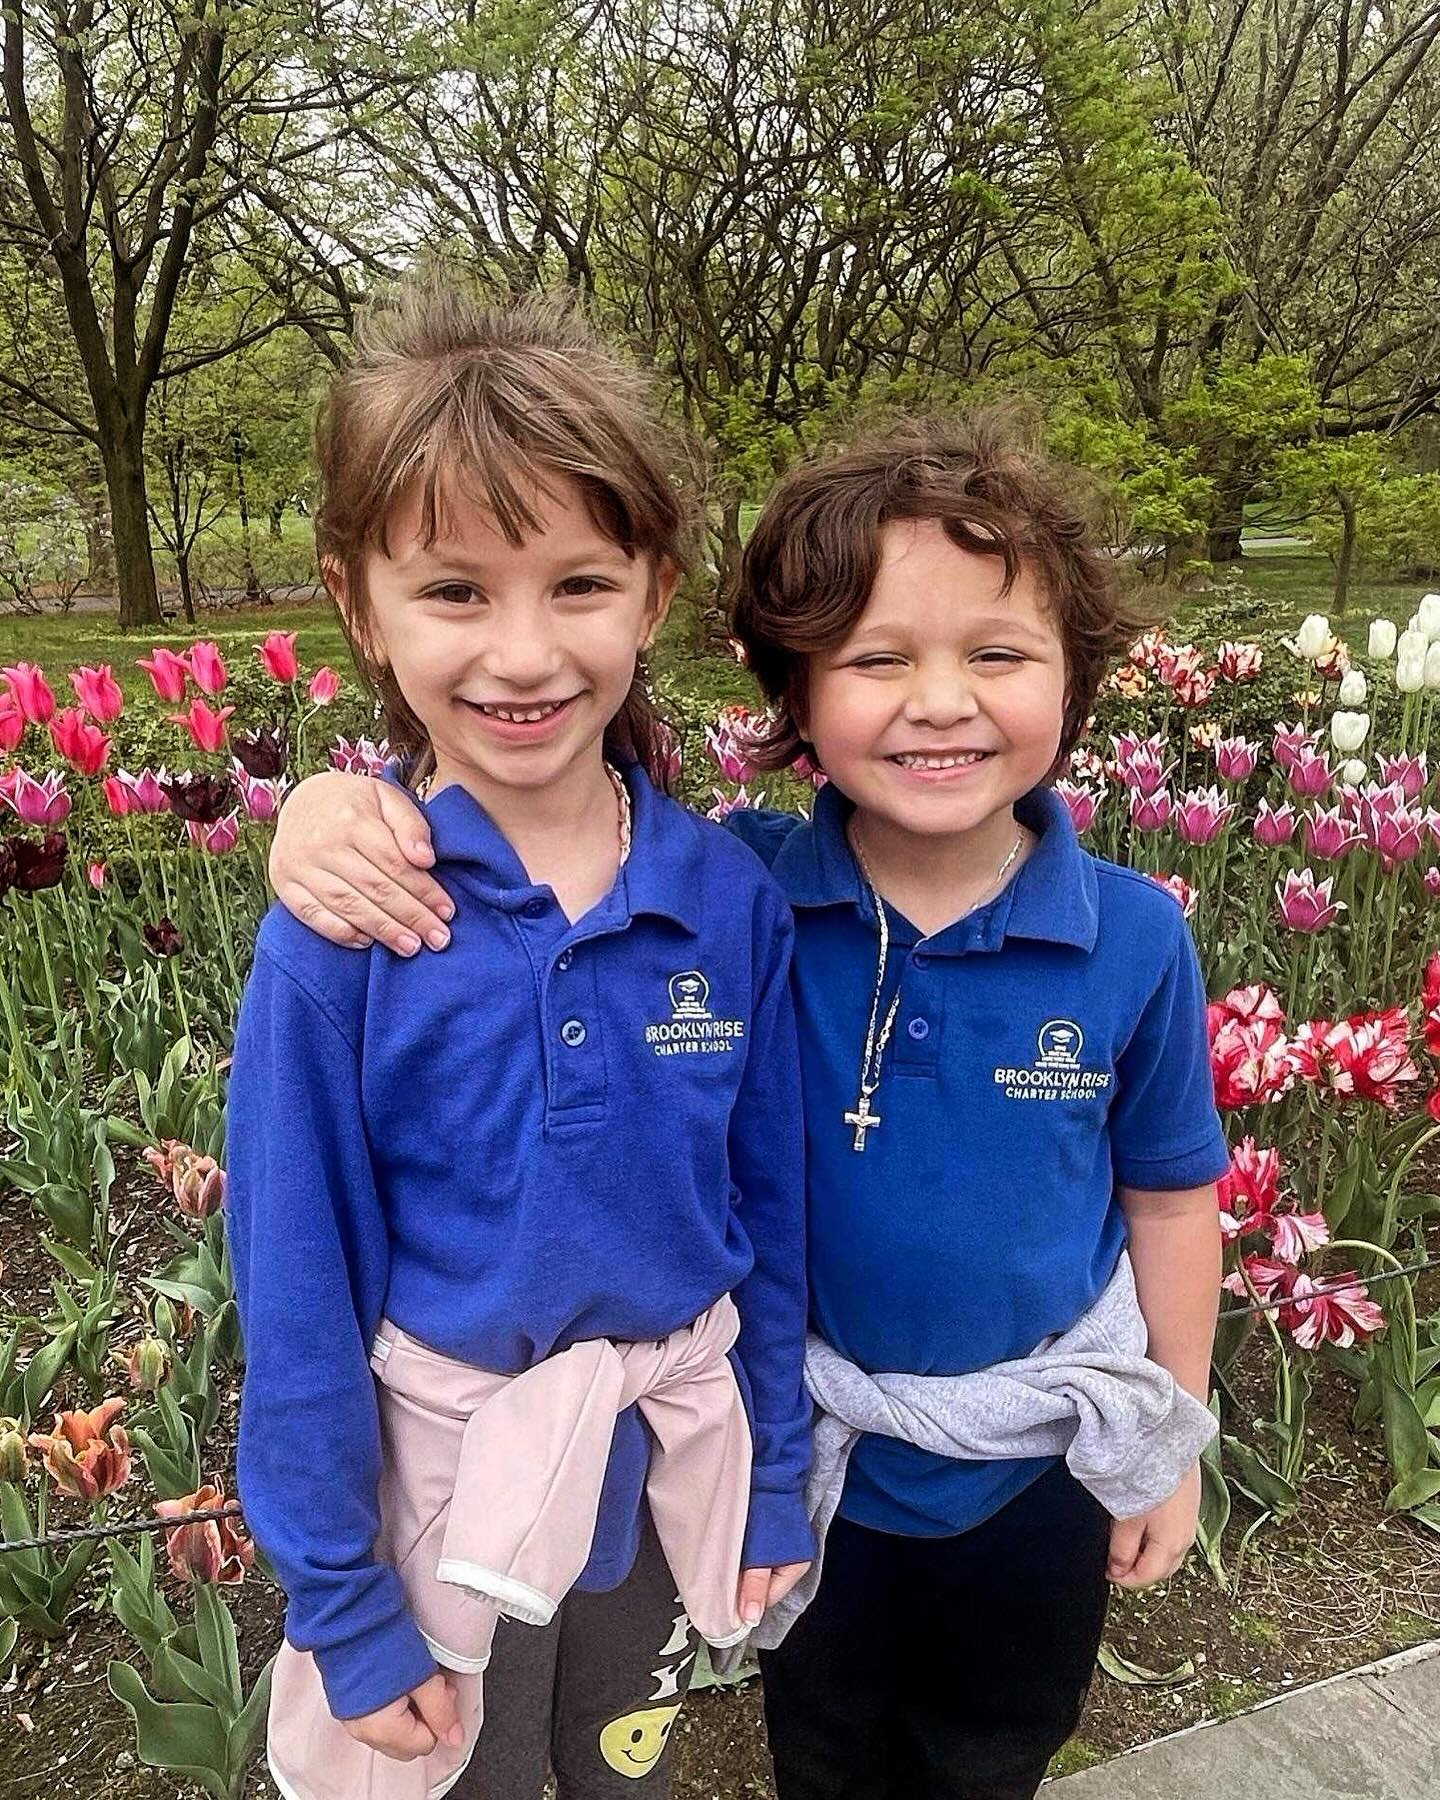 This was a very #TerrificTuesday at Brooklyn RISE because all of our K-2 kiddos went on a field trip to enjoy the beautiful weather and blossoming trees and flowers at the @brooklynbotanic gardens! 🌸
.
We love when our students get the chance to lea